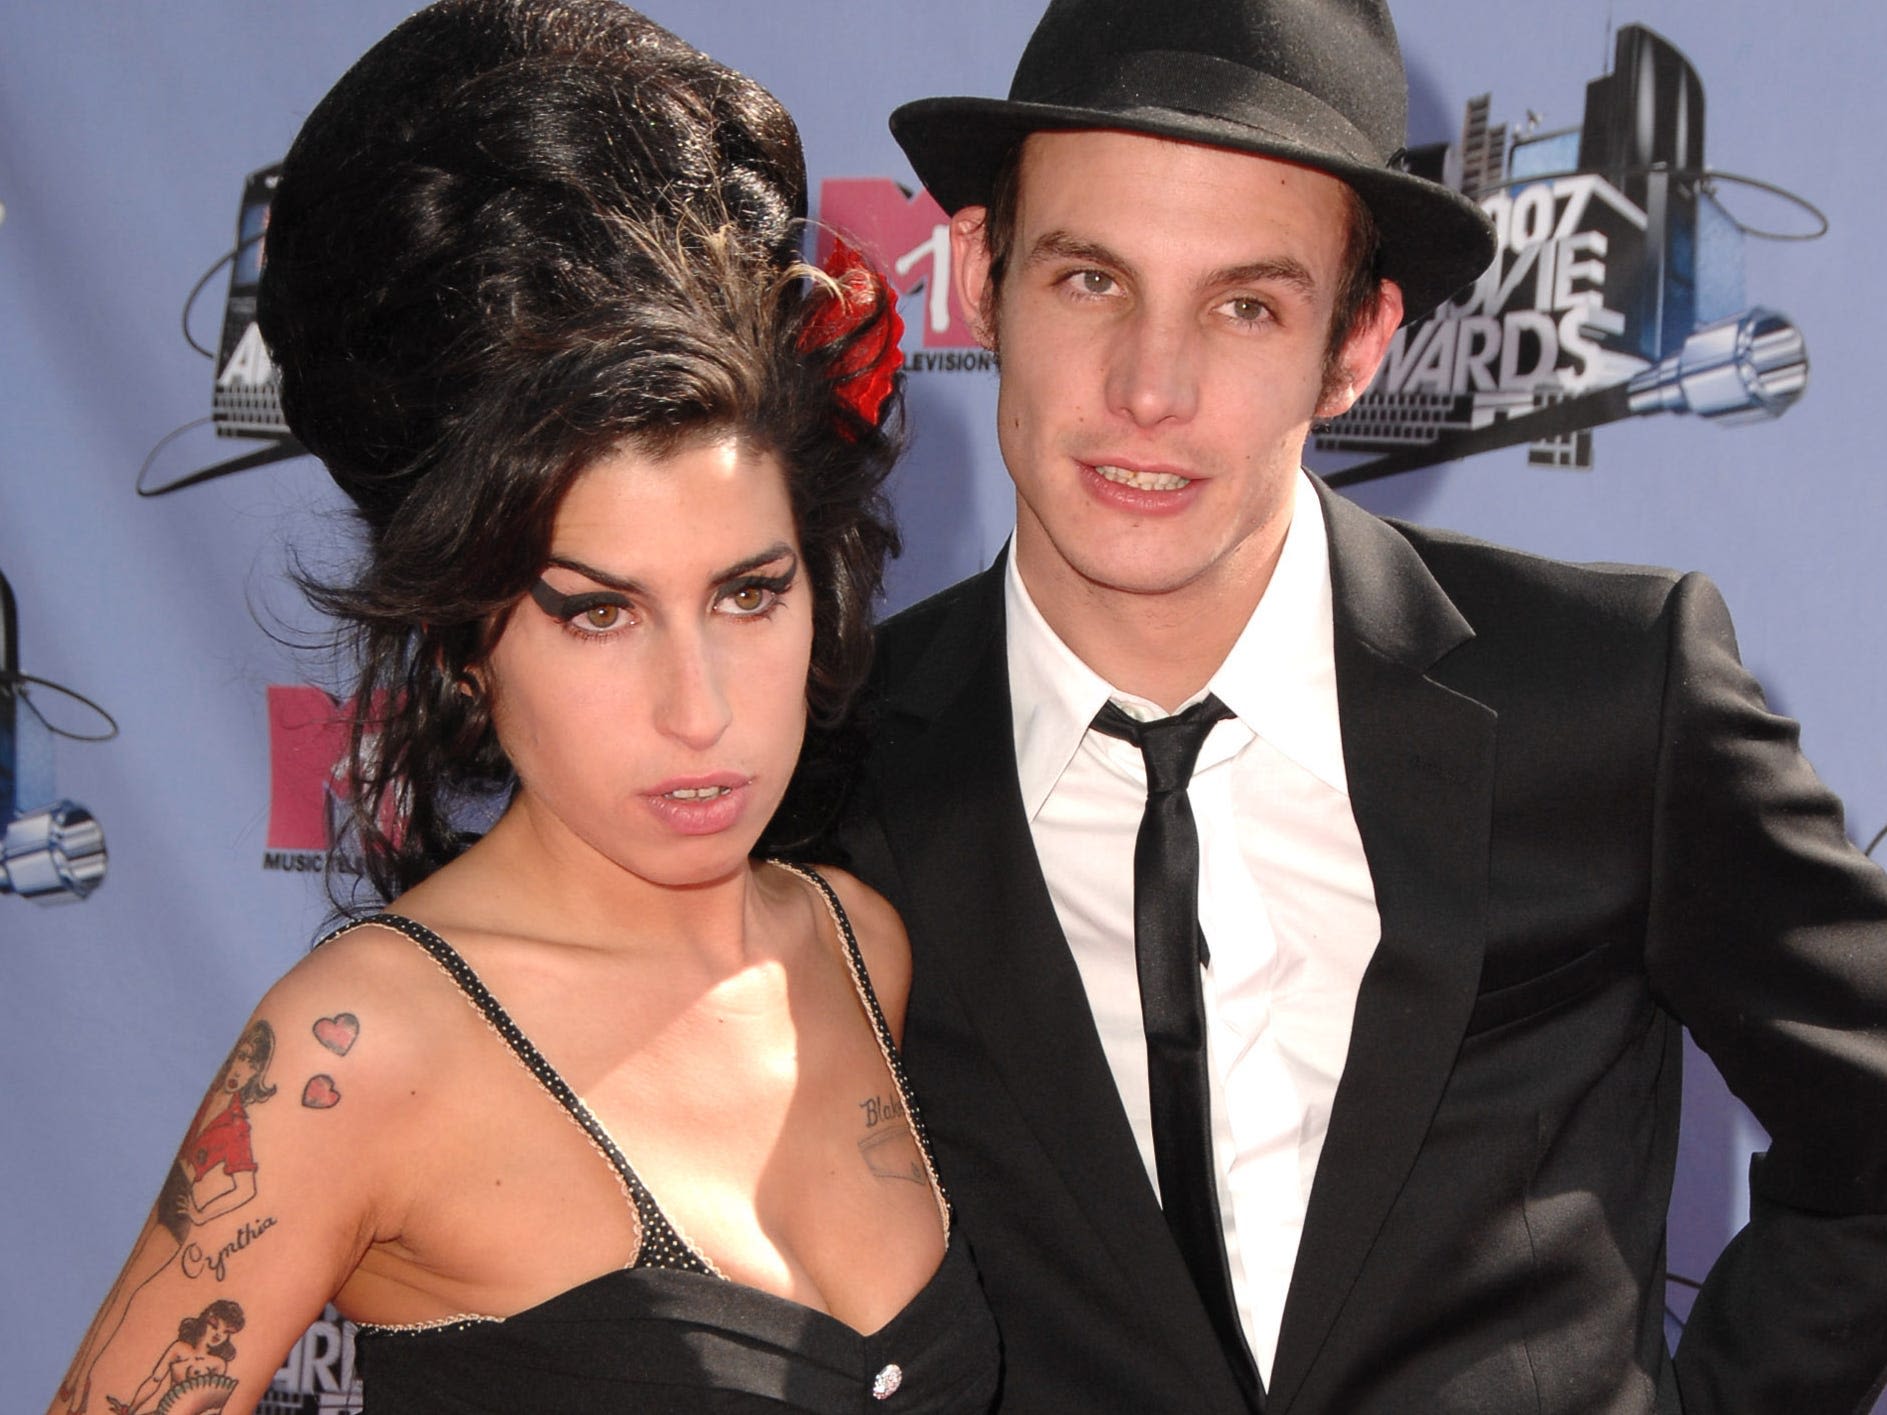 Amy Winehouse's ex-husband Blake Fielder-Civil says the 'Back to Black' biopic was 'surreal' and 'therapeutic' to watch